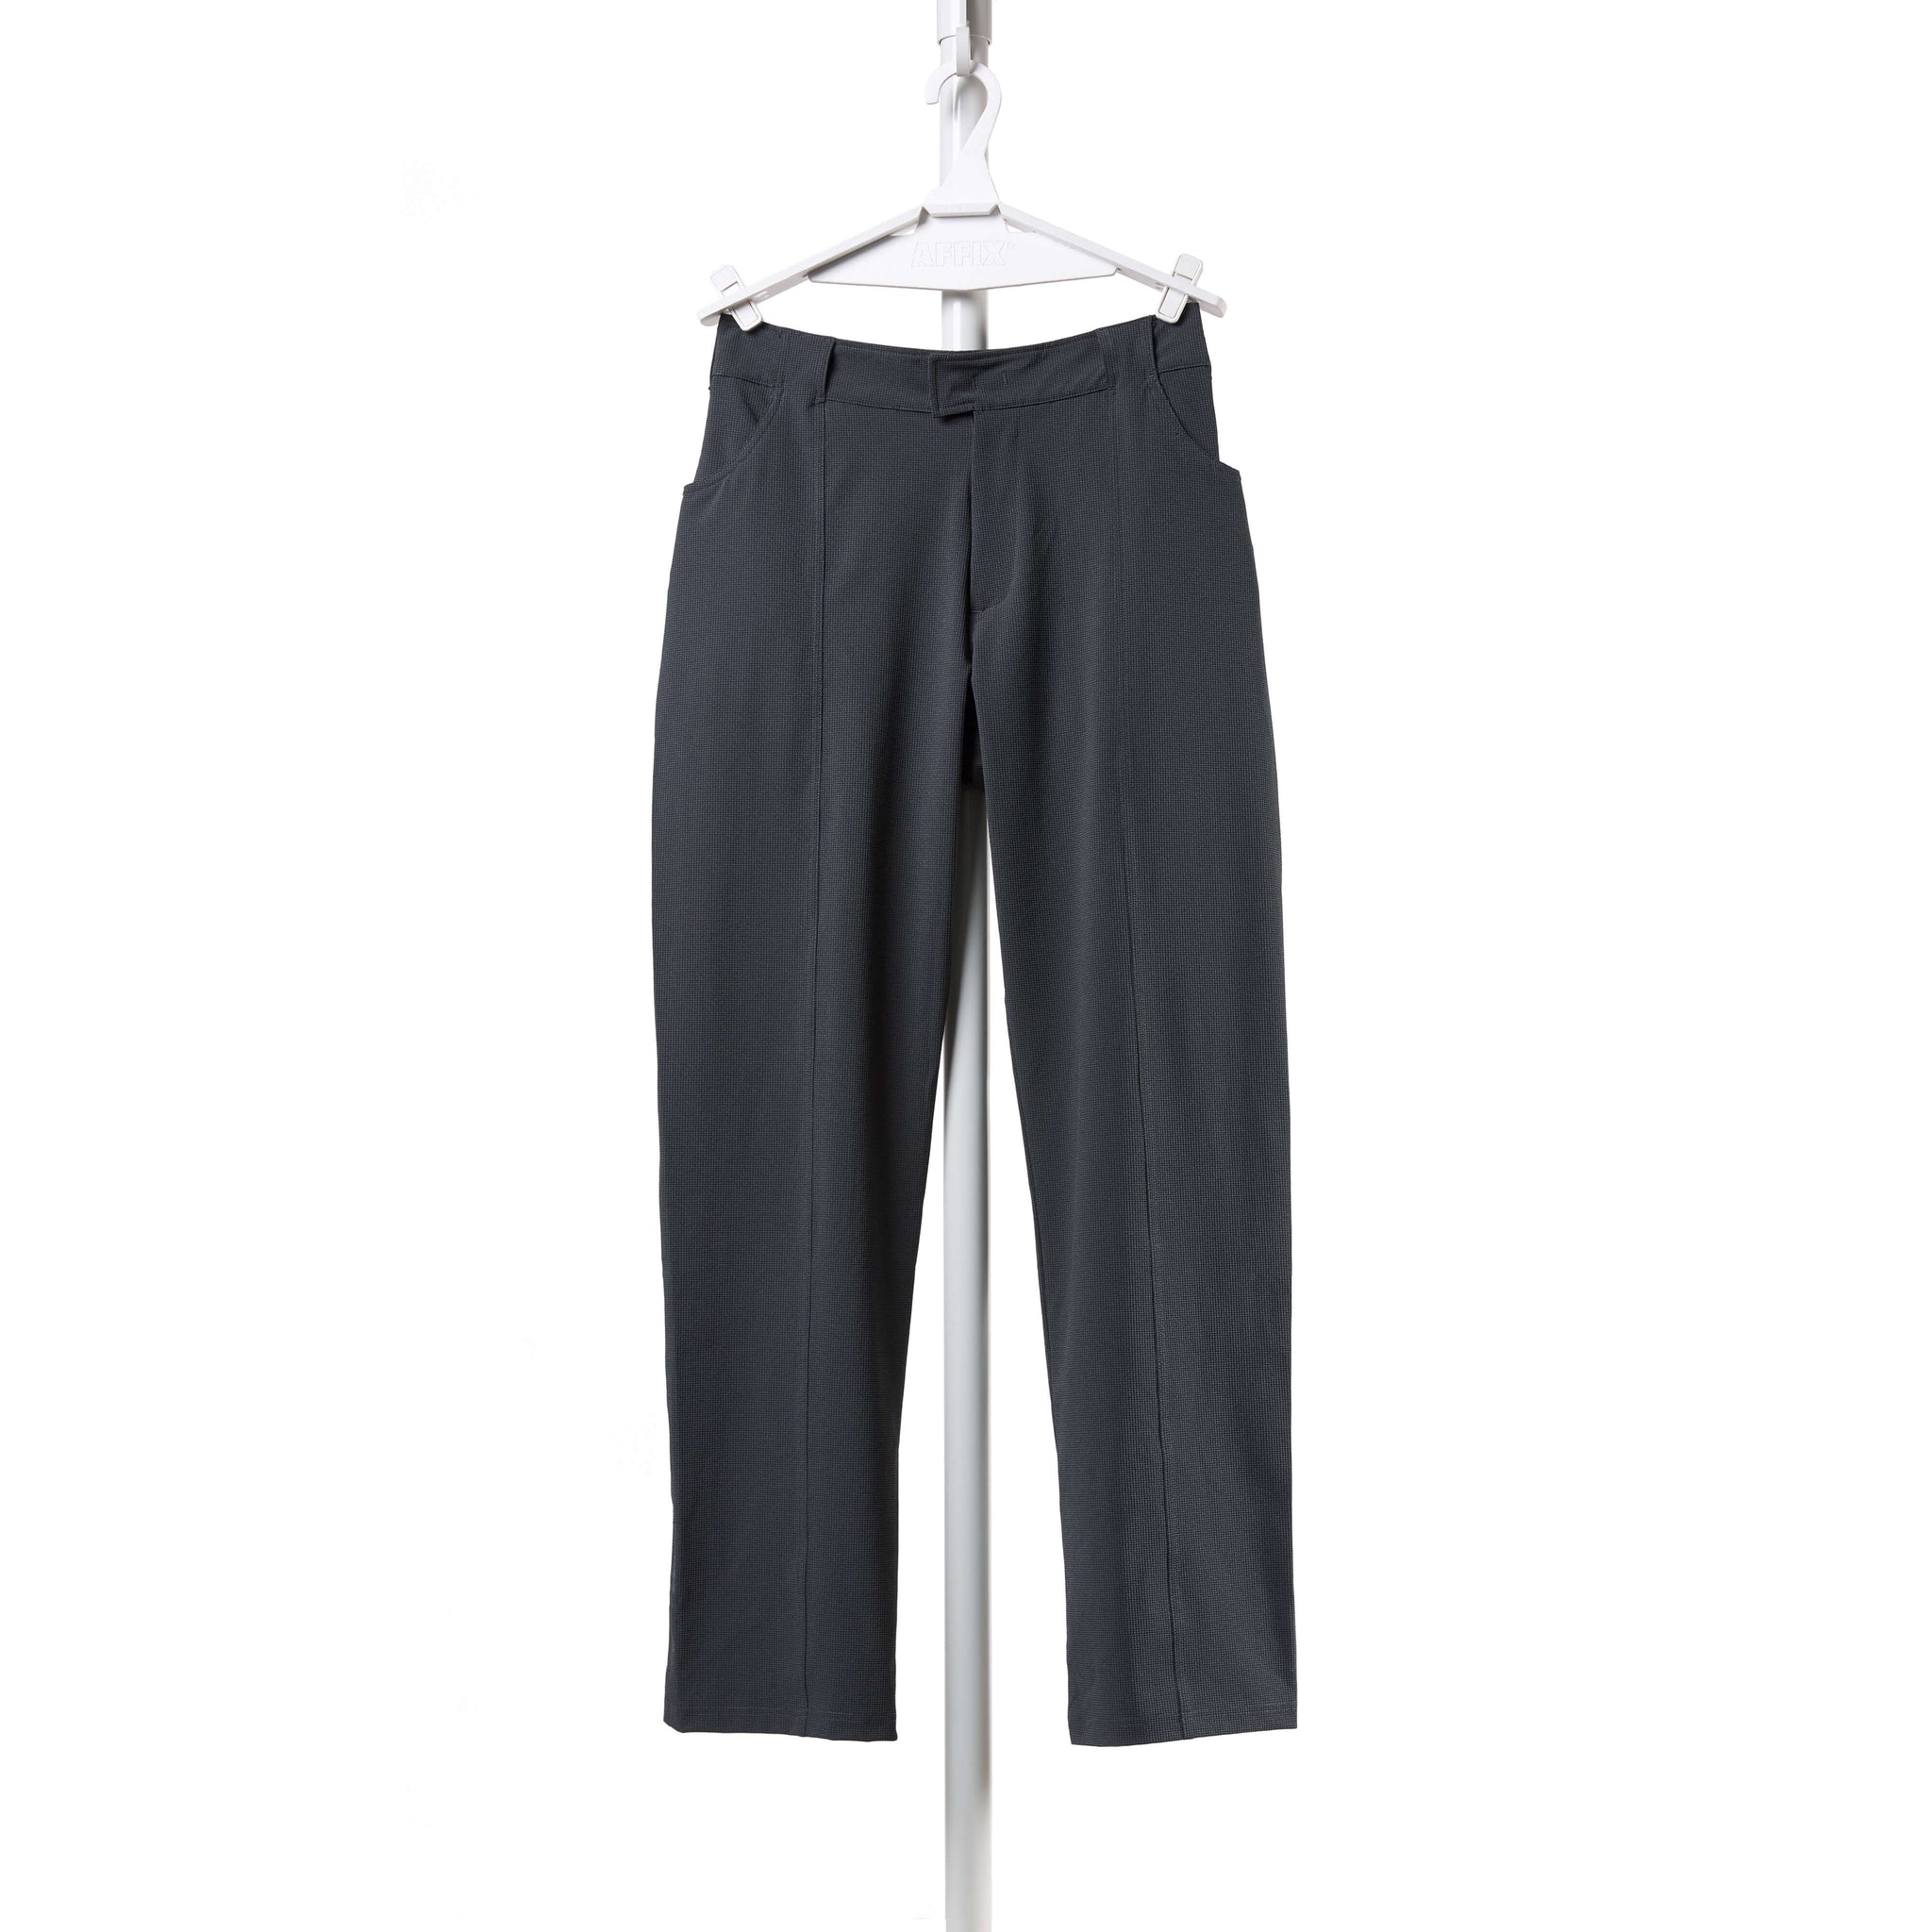 AFFIX WORKS Trousers